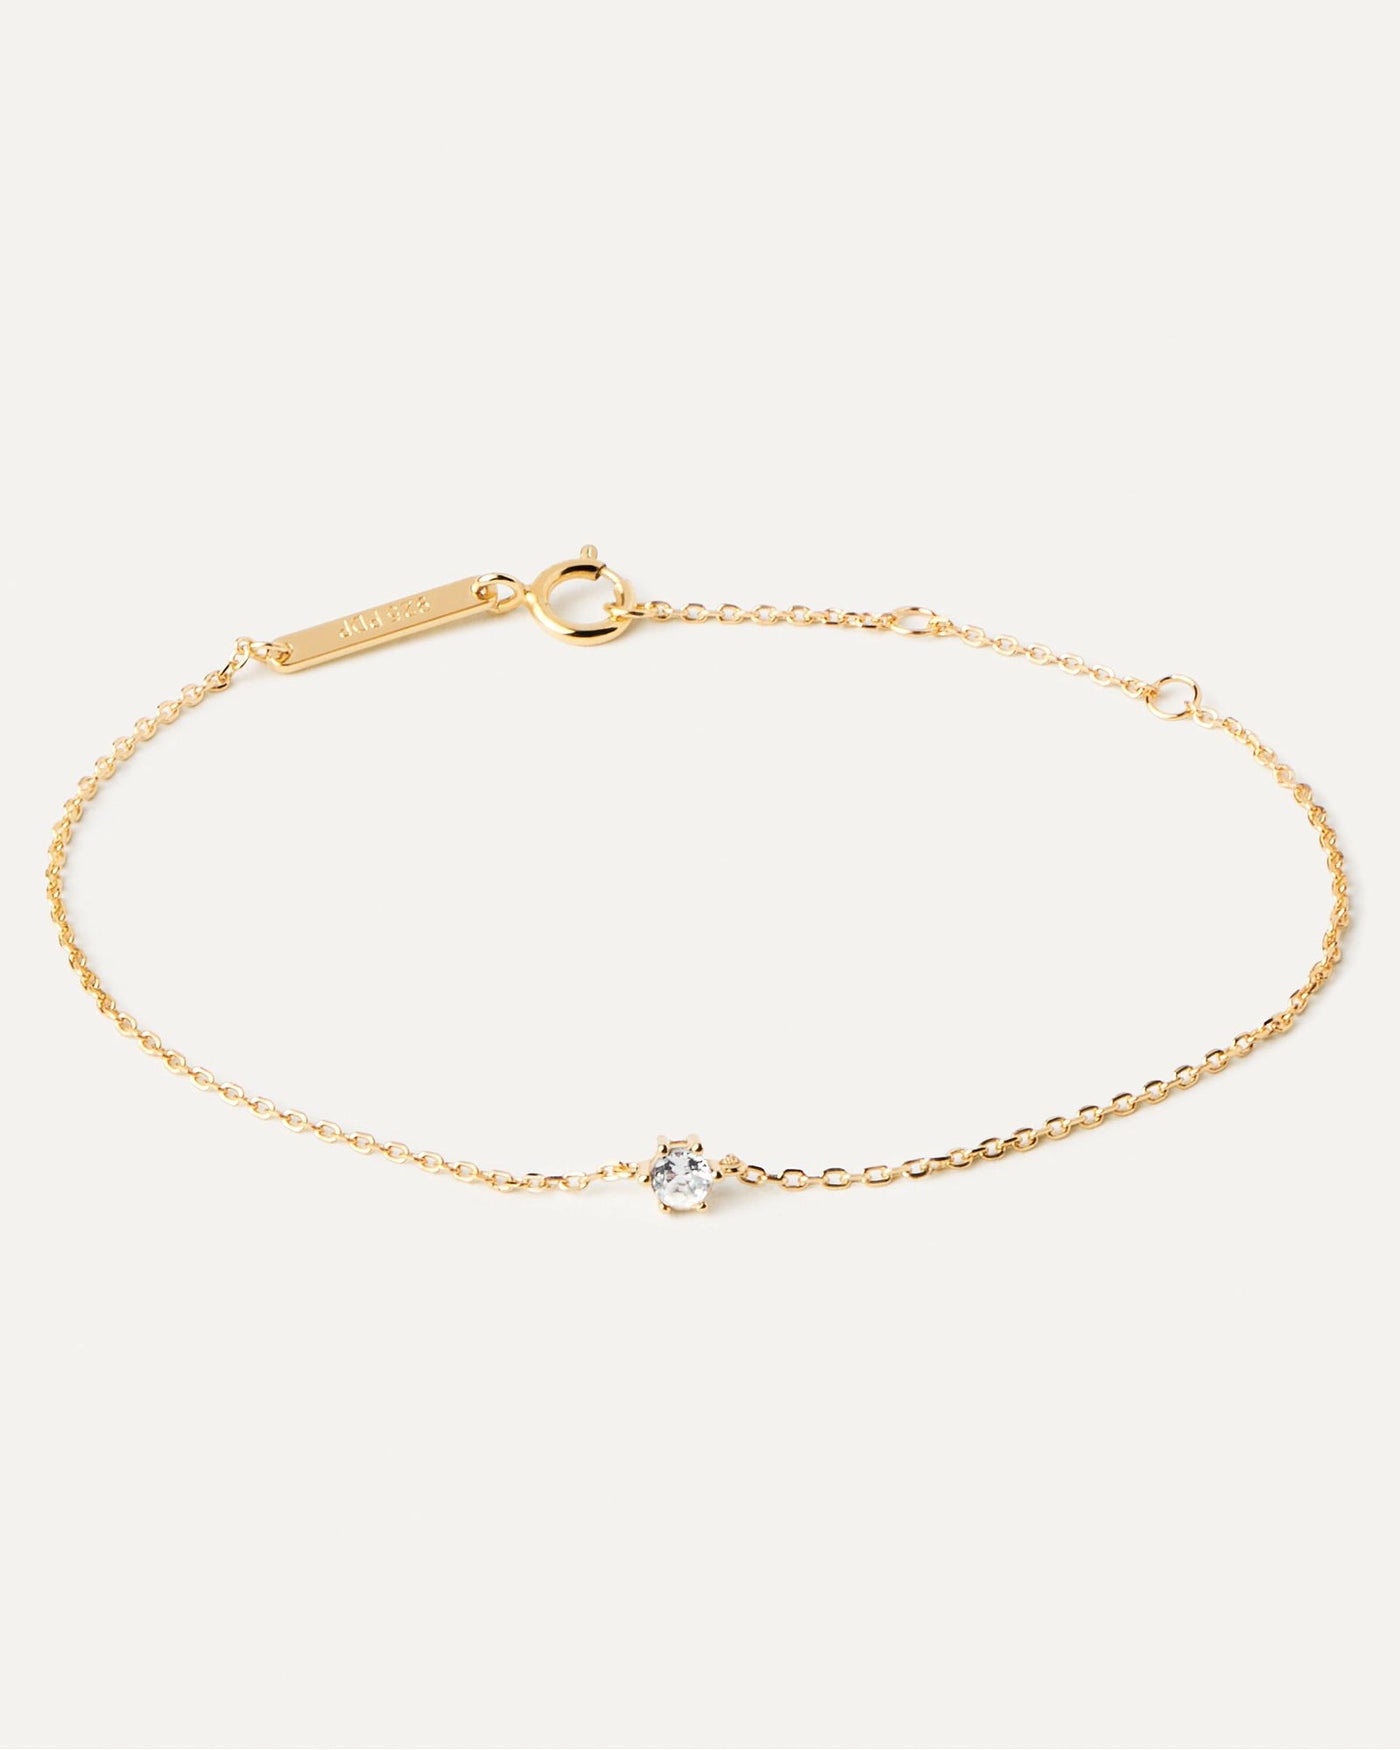 2024 Selection | White Solitary Bracelet. Thin chain bracelet in 18k gold plated silver and a white zirconia. Get the latest arrival from PDPAOLA. Place your order safely and get this Best Seller. Free Shipping.